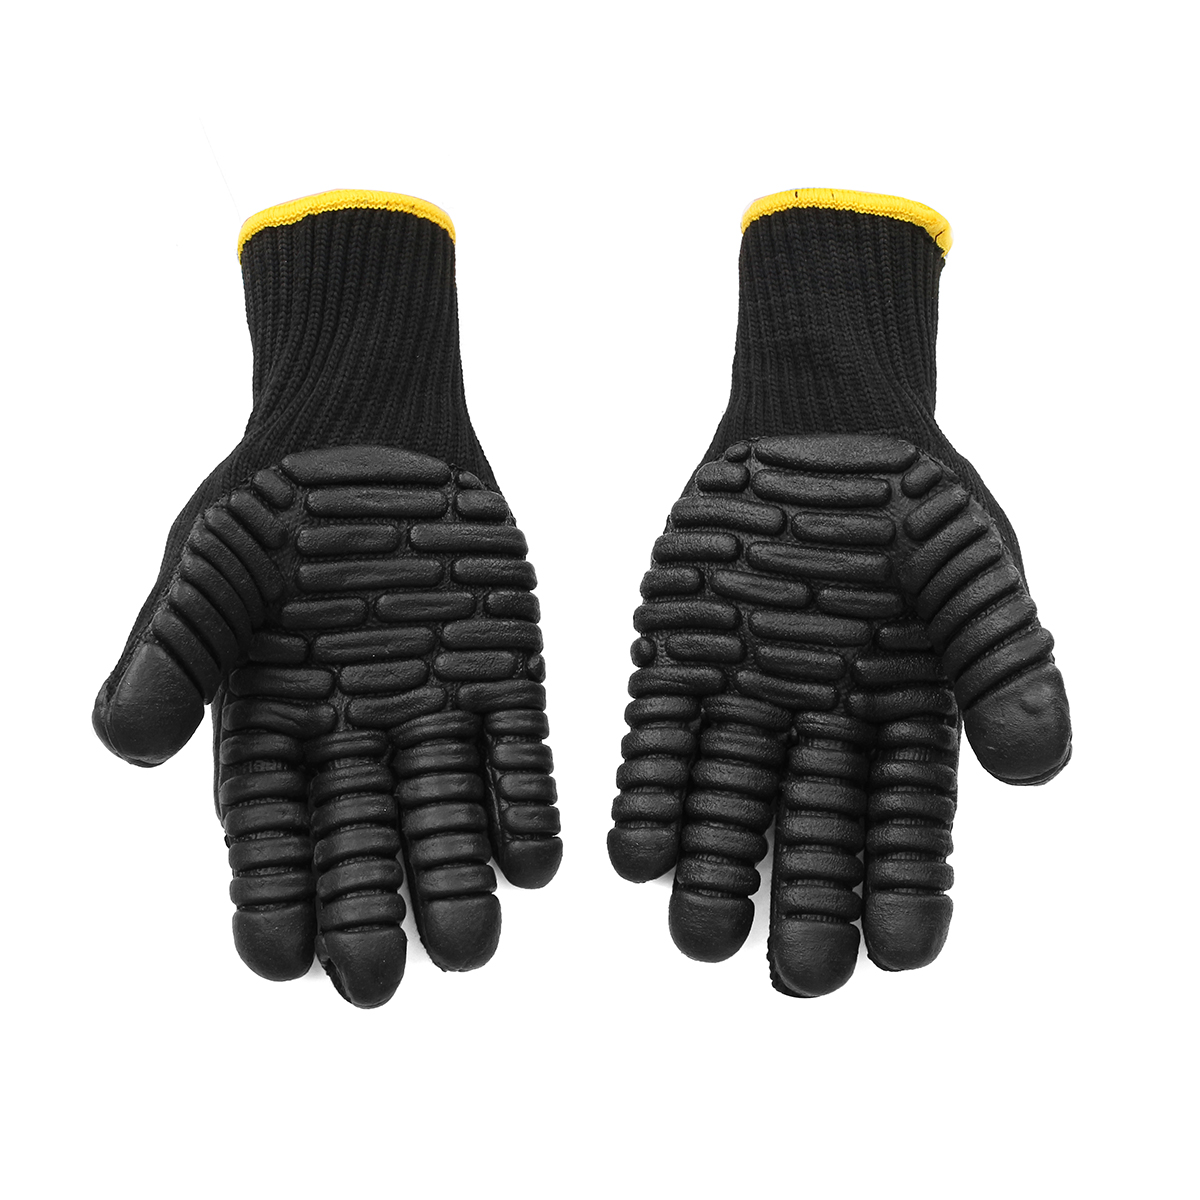 Rubber-Touch-Screen-Gloves-Anti-slip-Shockproof-Worker-Safe-Gloves-Thickened-Mining-Drill-Work-Tacti-1231695-6